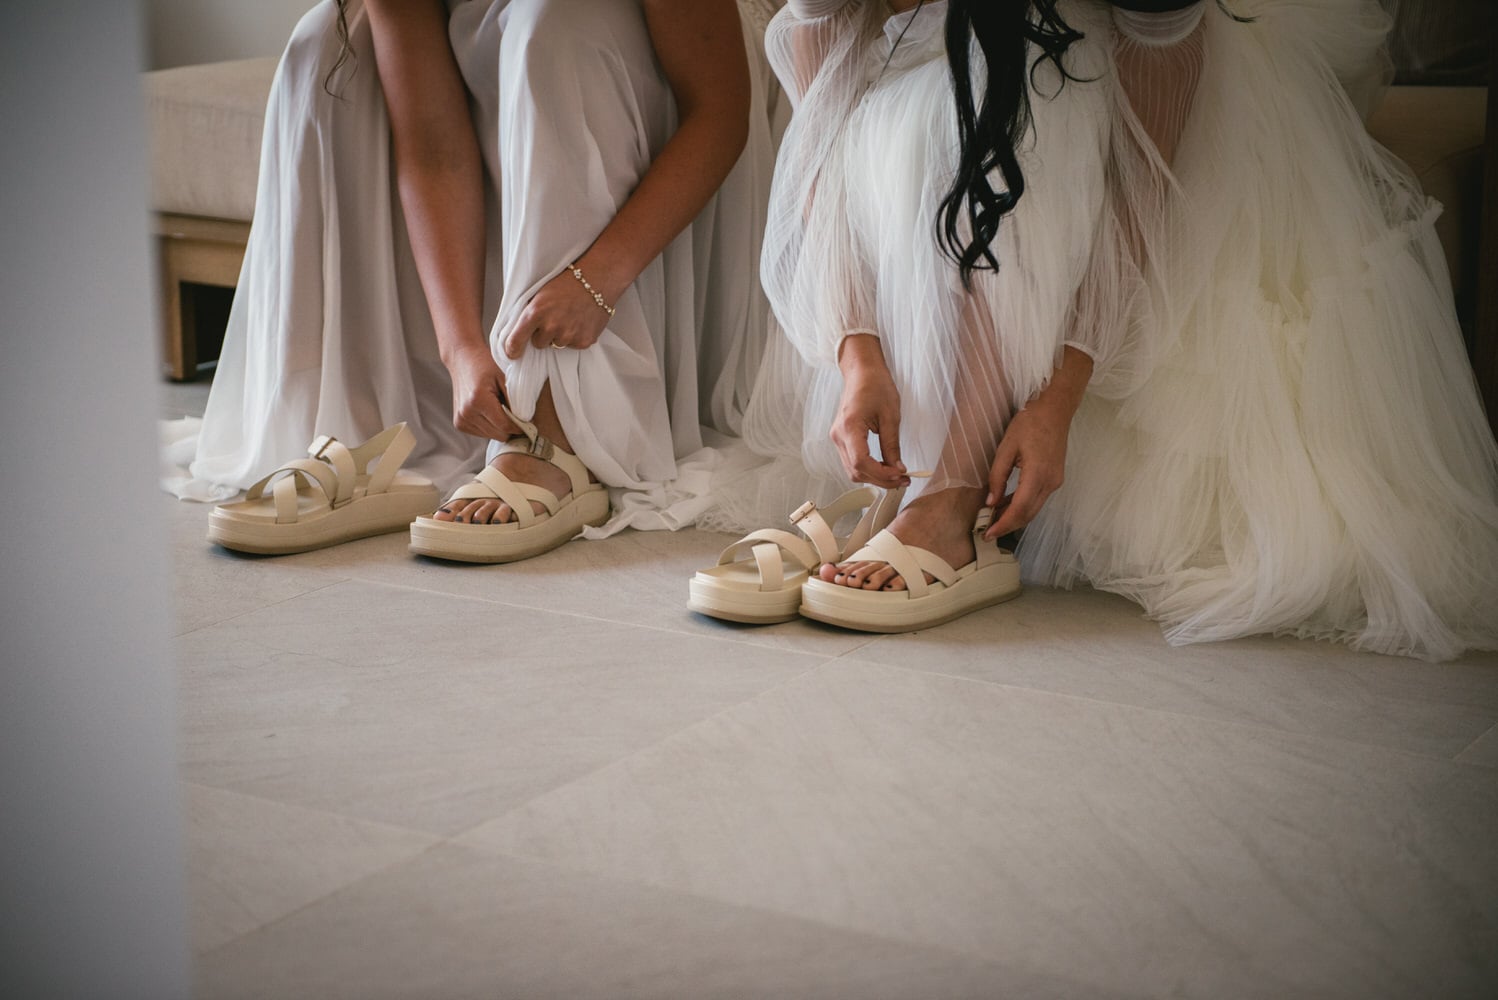 Brides putting on their shoes, final touches for their Corfu elopement.